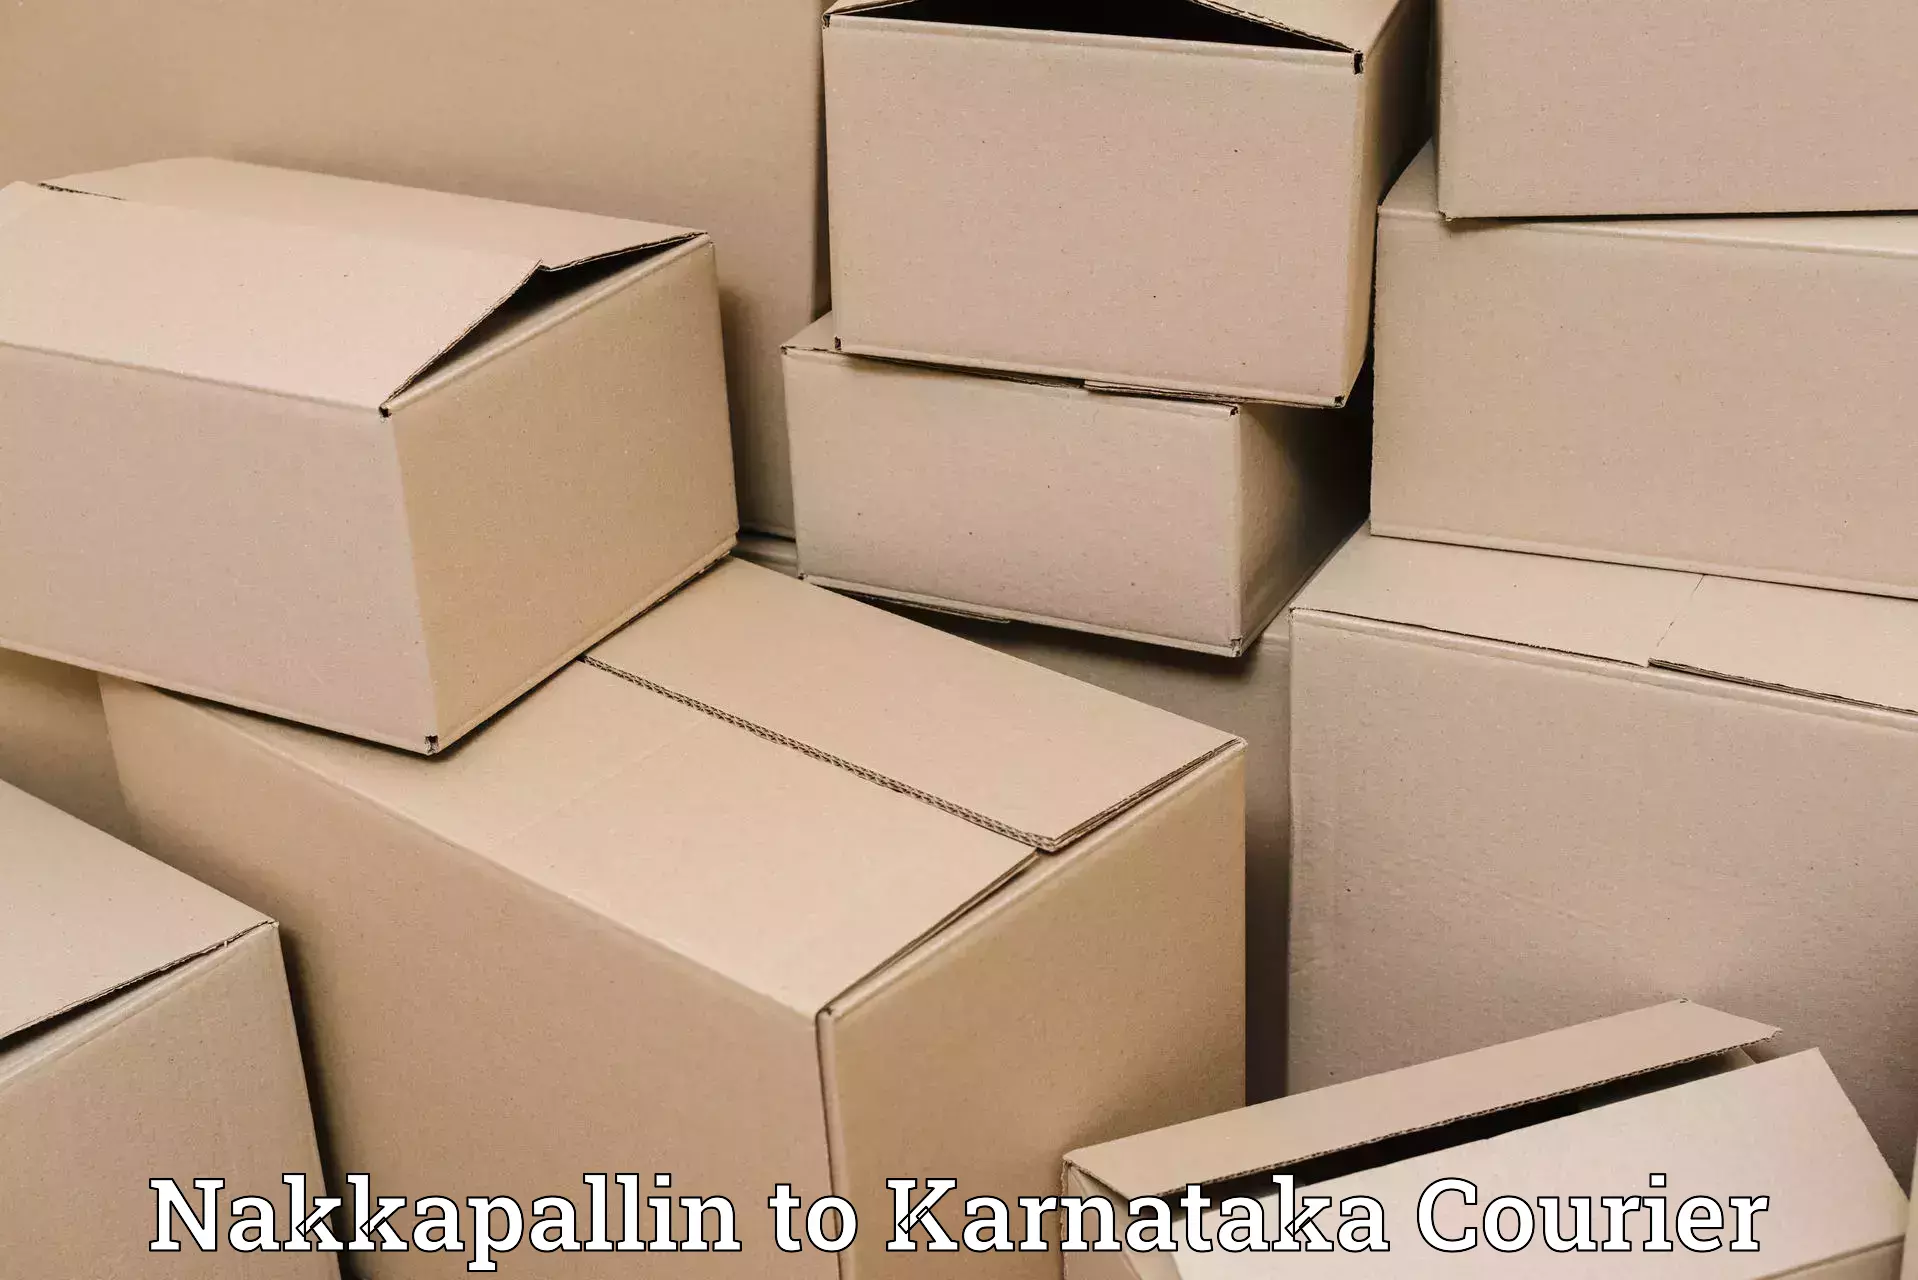 Express delivery solutions Nakkapallin to yedrami